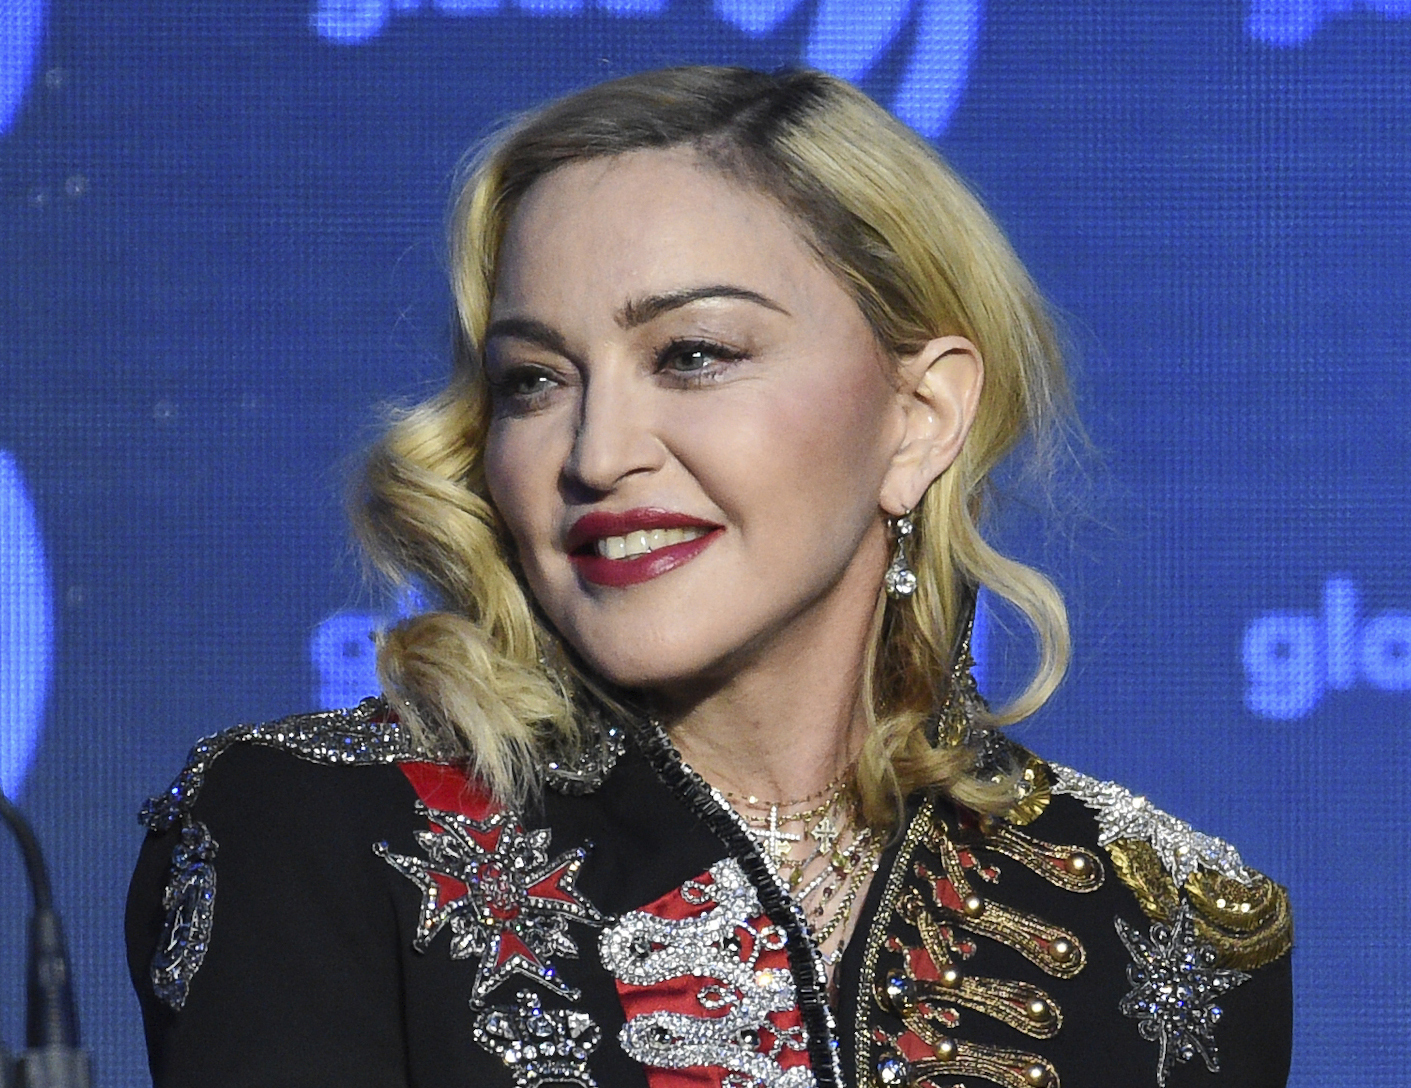 FILE - Madonna appears at the 30th annual GLAAD Media Awards in New York on May 4, 2019, in New York. Madonna kicked off her career-spanning Celebration Tour at London's O2 Arena on Saturday night, Oct. 14, 2023, marking her first performance since suffering what her manager called a “serious bacterial infection” that led to hospitalization in an intensive care unit for several days back in June. (Photo by Evan Agostini/Invision/AP, File)